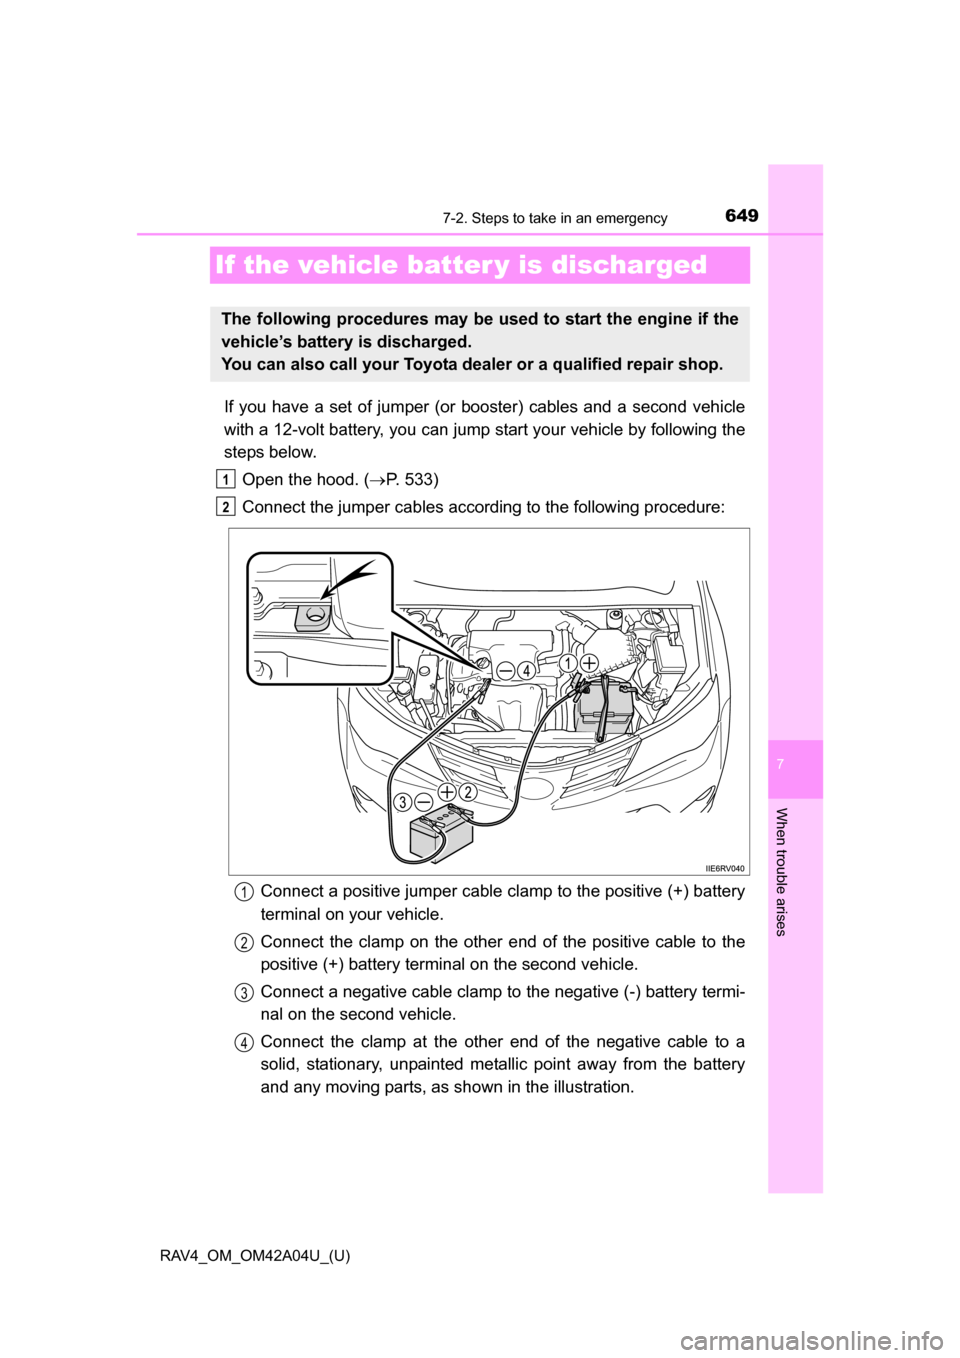 TOYOTA RAV4 2014 XA40 / 4.G Owners Manual 649
RAV4_OM_OM42A04U_(U)
7
When trouble arises
7-2. Steps to take in an emergency
If the vehicle batter y is discharged
If you have a set of jumper (or booster) cables and a second vehicle
with a 12-v